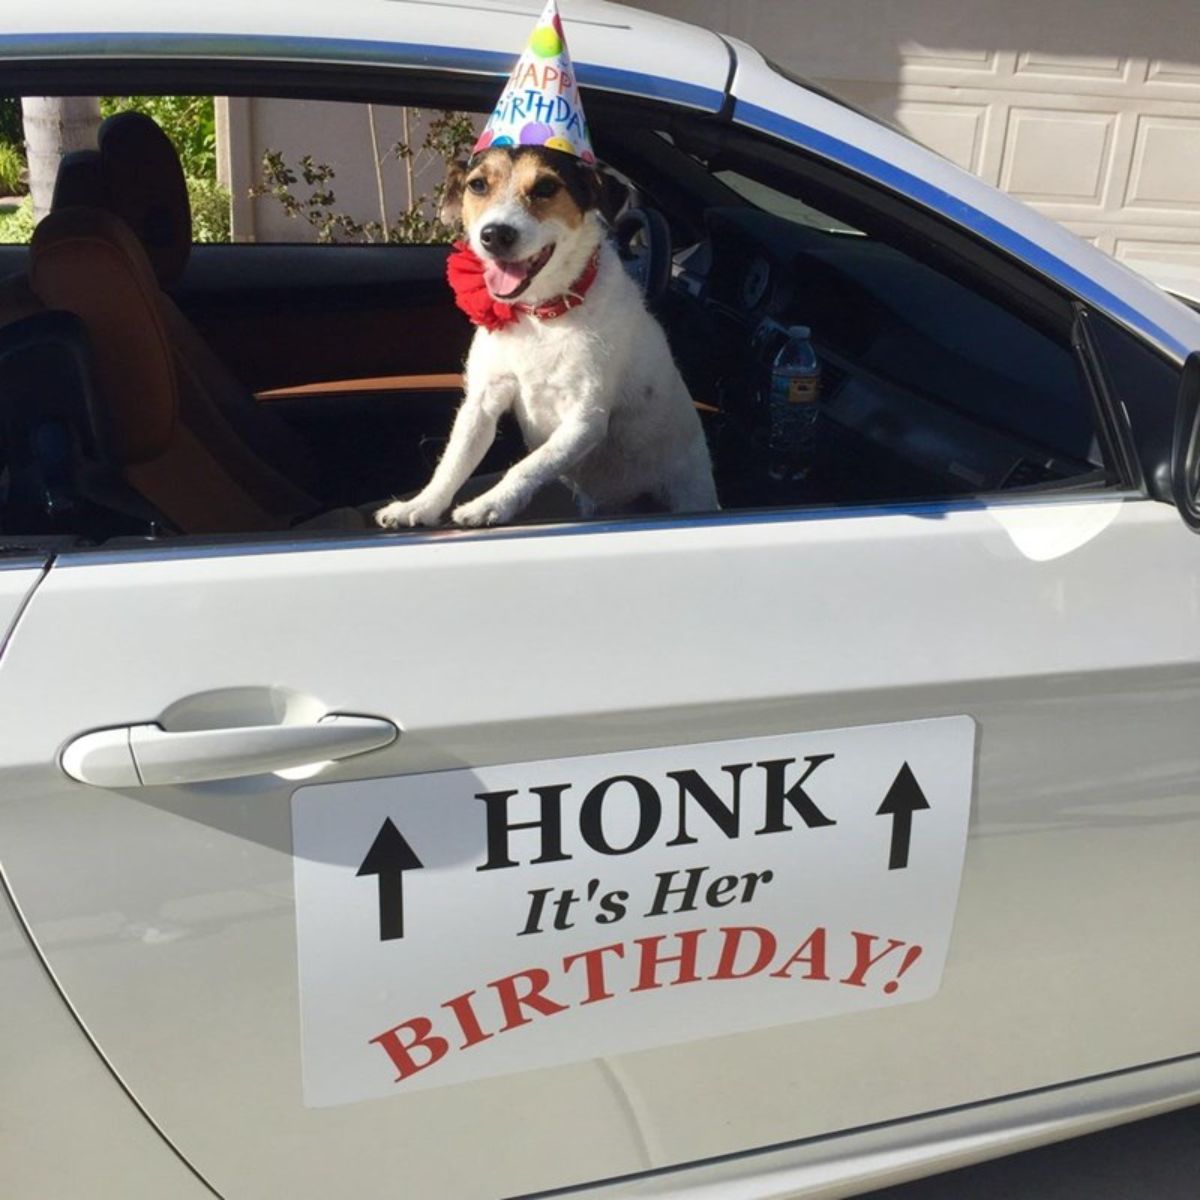 a dog with a birthday party hat looking out of a silver car window with a sign on the car saying honk it's her birthday